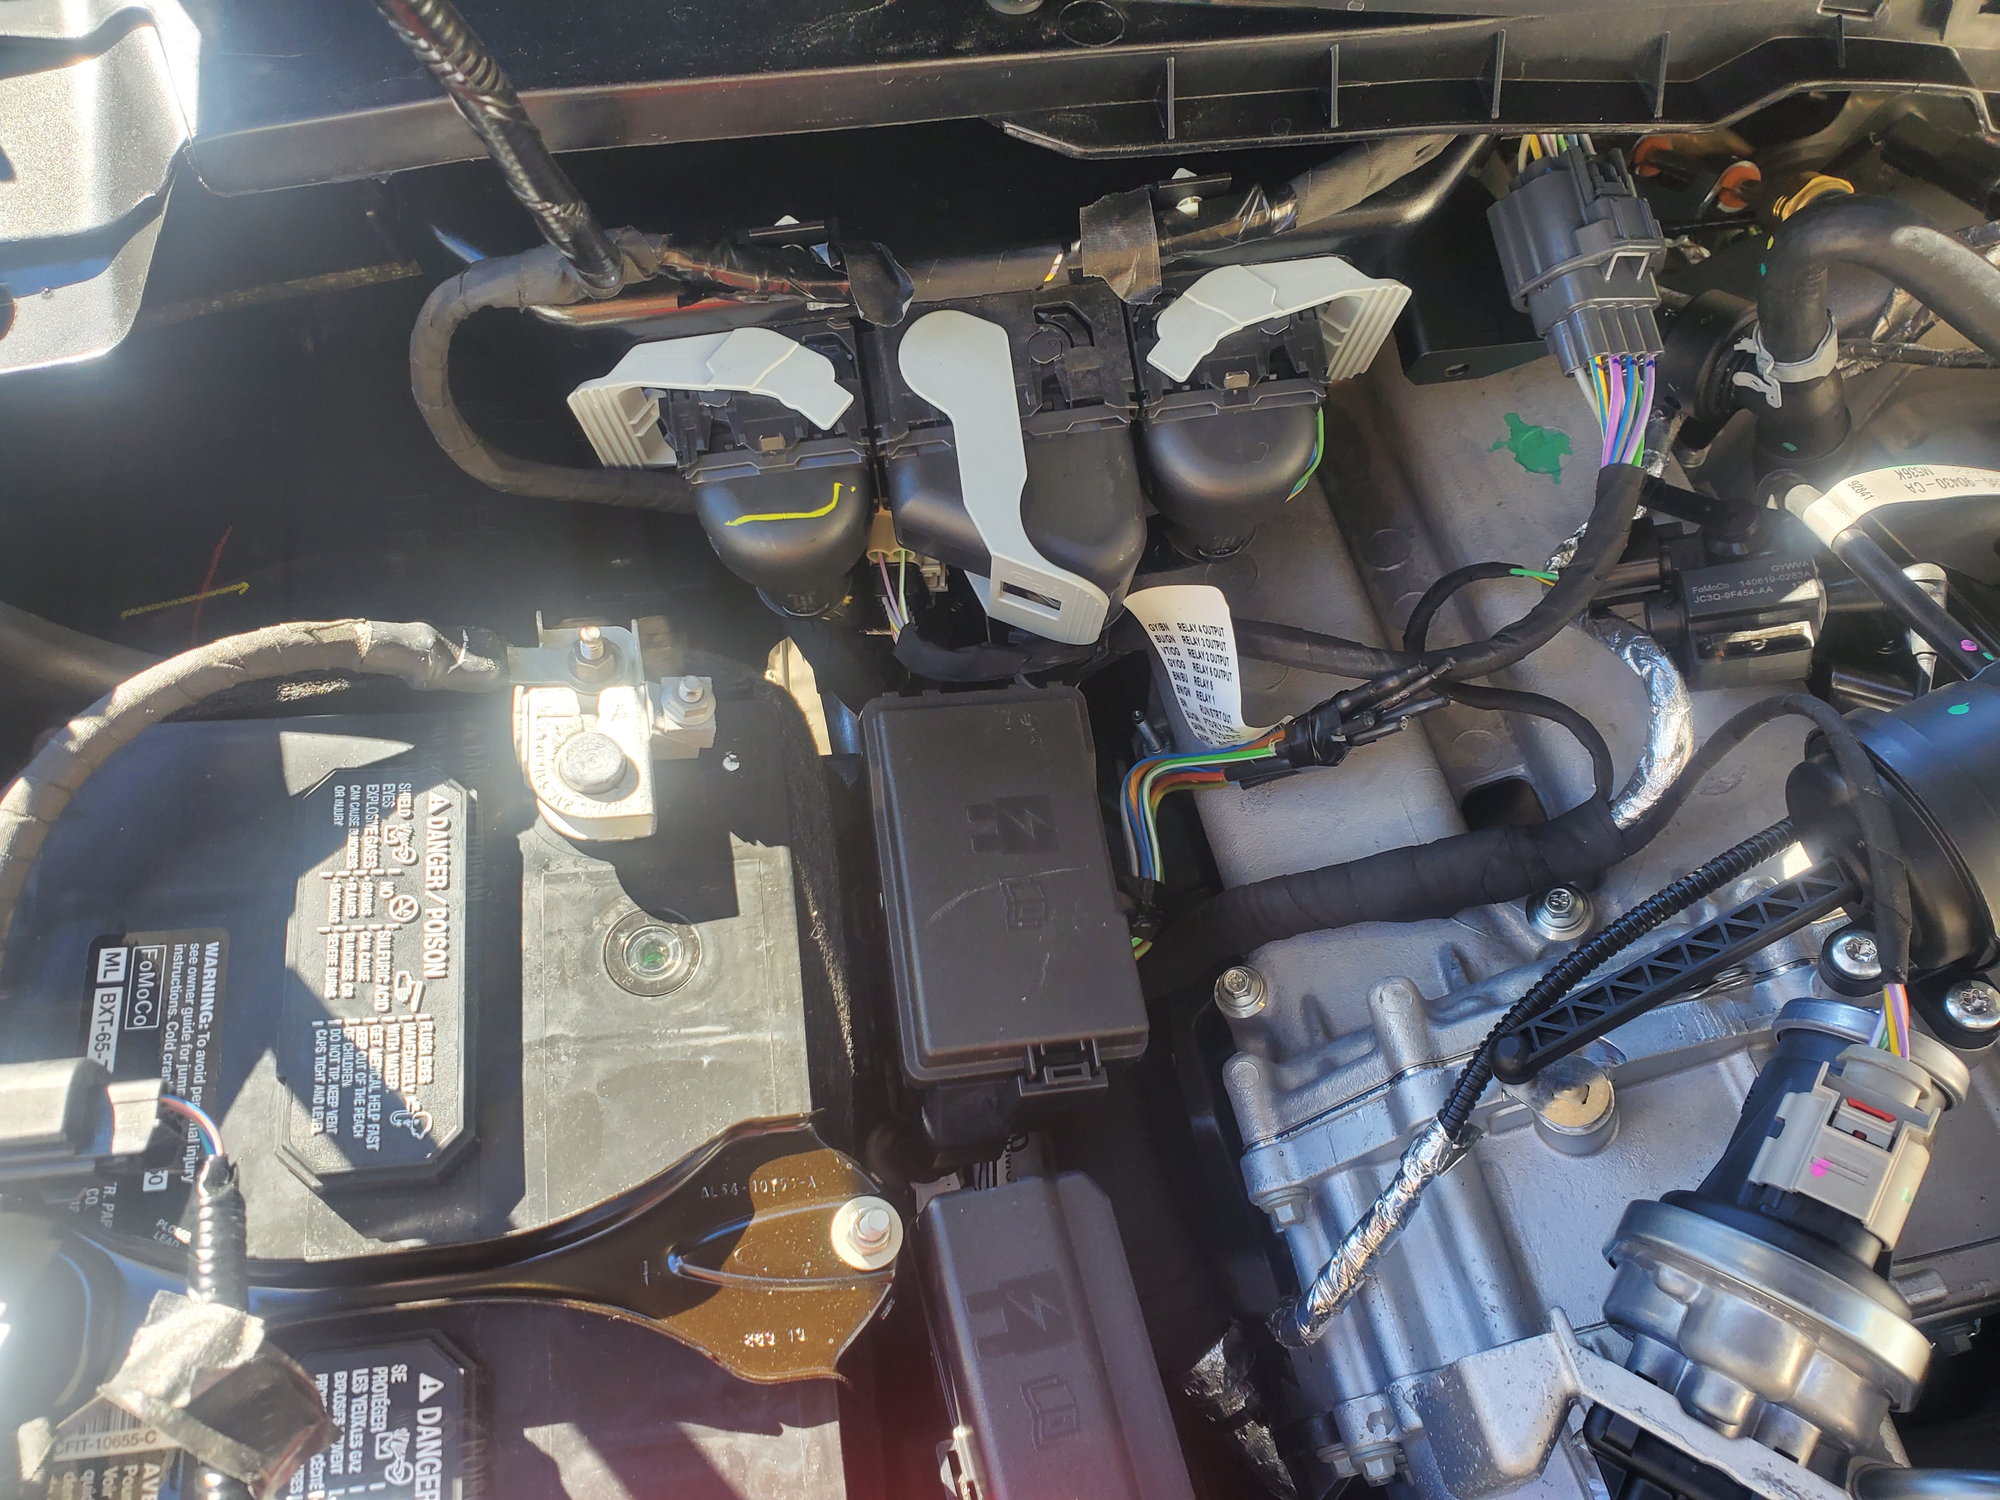 2020 Upfitter switch wiring - Ford Truck Enthusiasts Forums